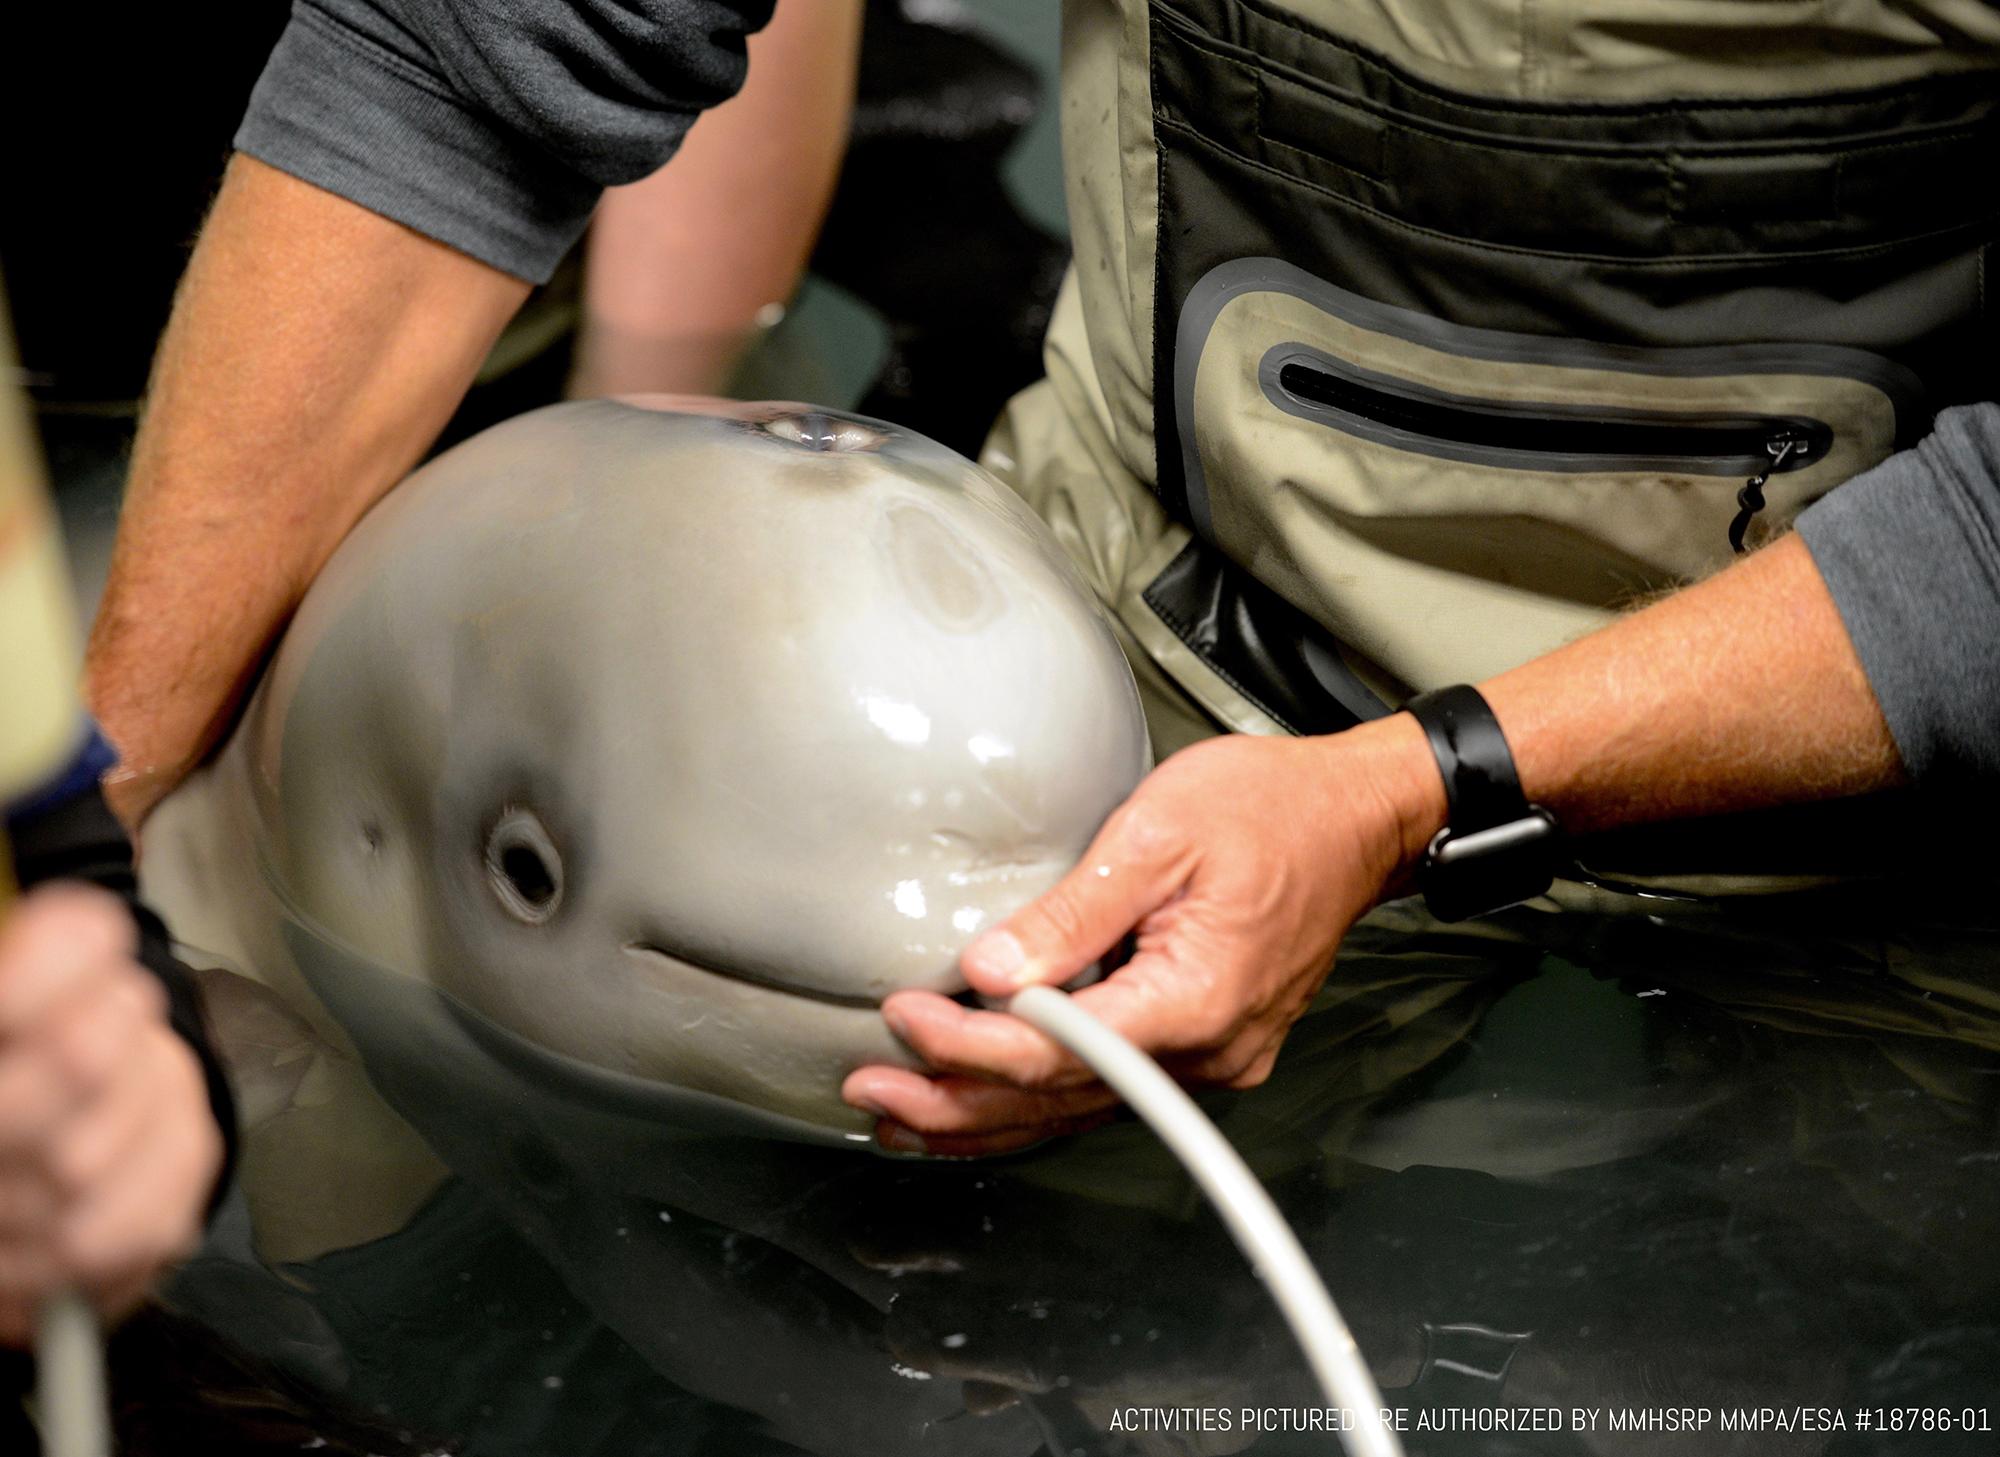 Experts have found that letting the rescued beluga whale calf suckle from a tube rather than a bottle is the most effective method to provide the calf with nutrients. (Courtesy ©Alaska SeaLife Center)